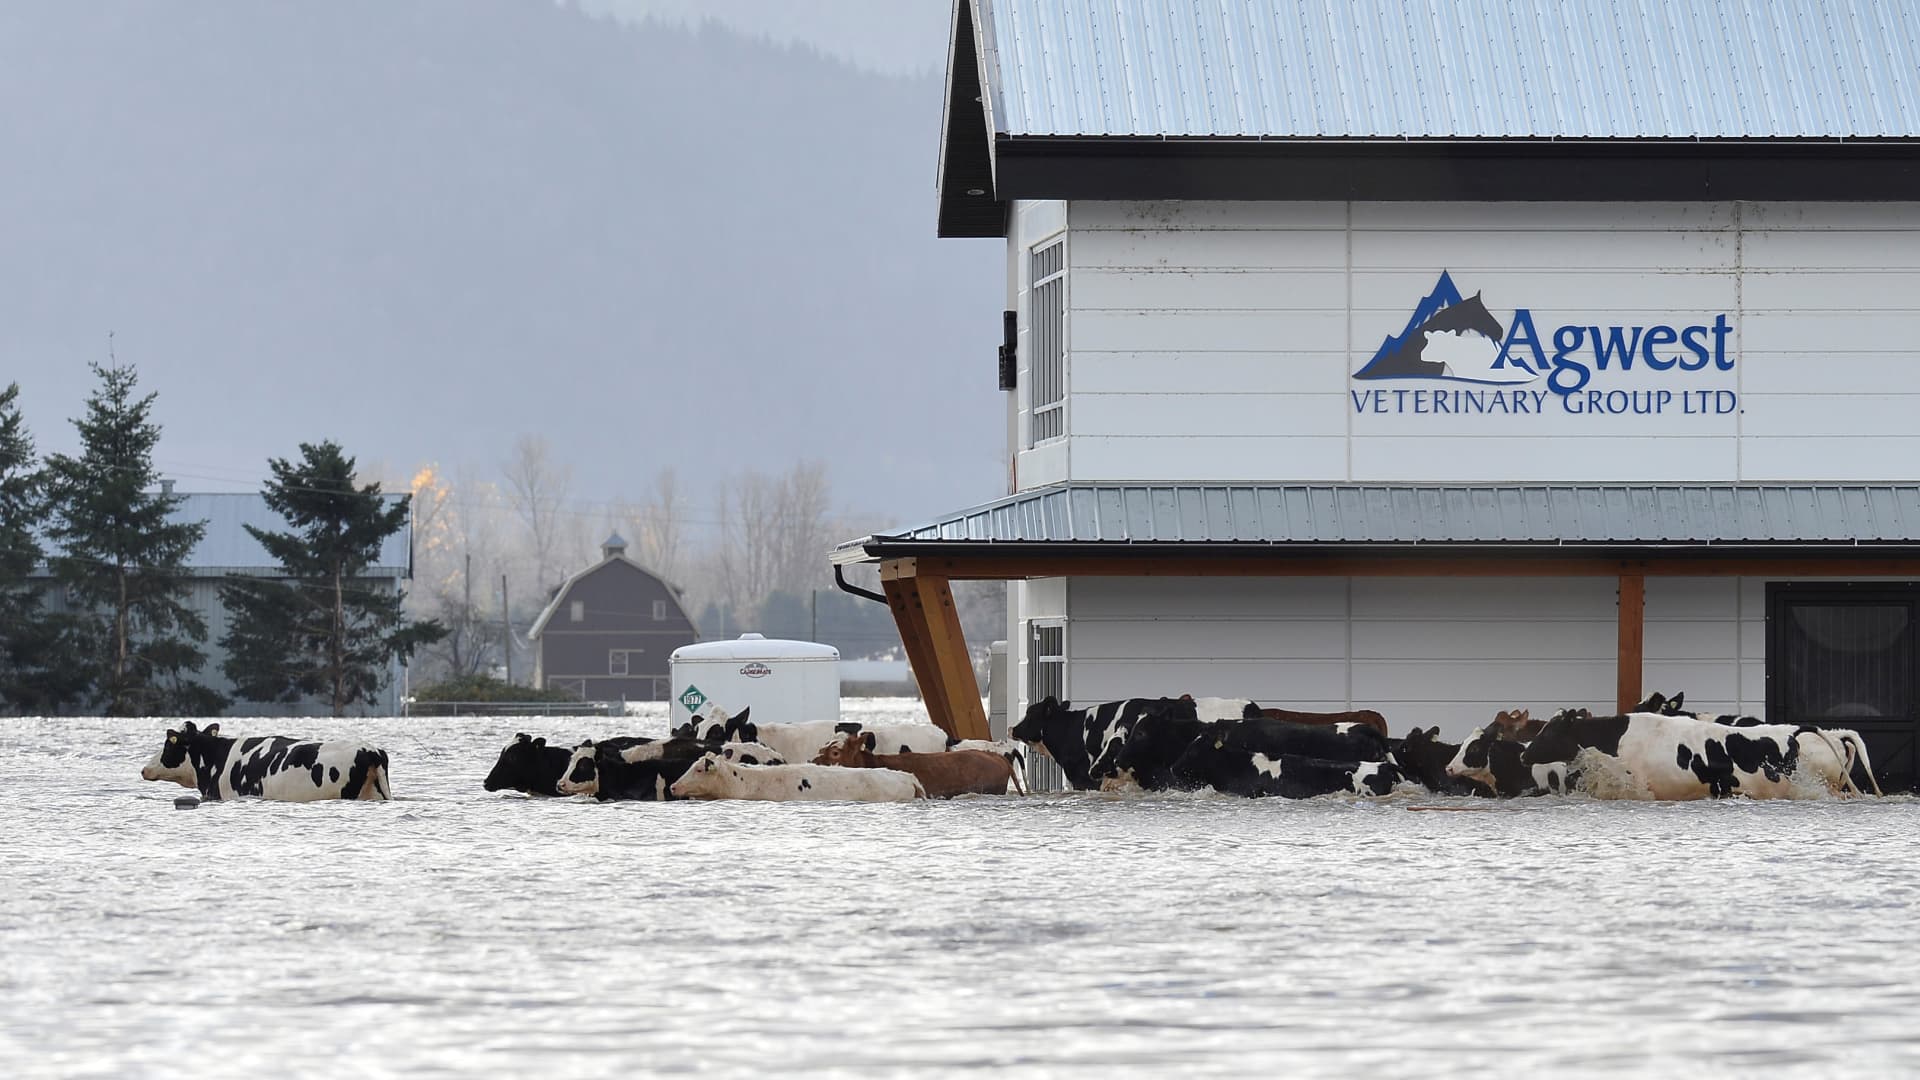 Cows are seen stranded due to widespread flooding in Abbotsford, British Columbia, Canada November 16, 2021. REUTERS/Jennifer Gauthier